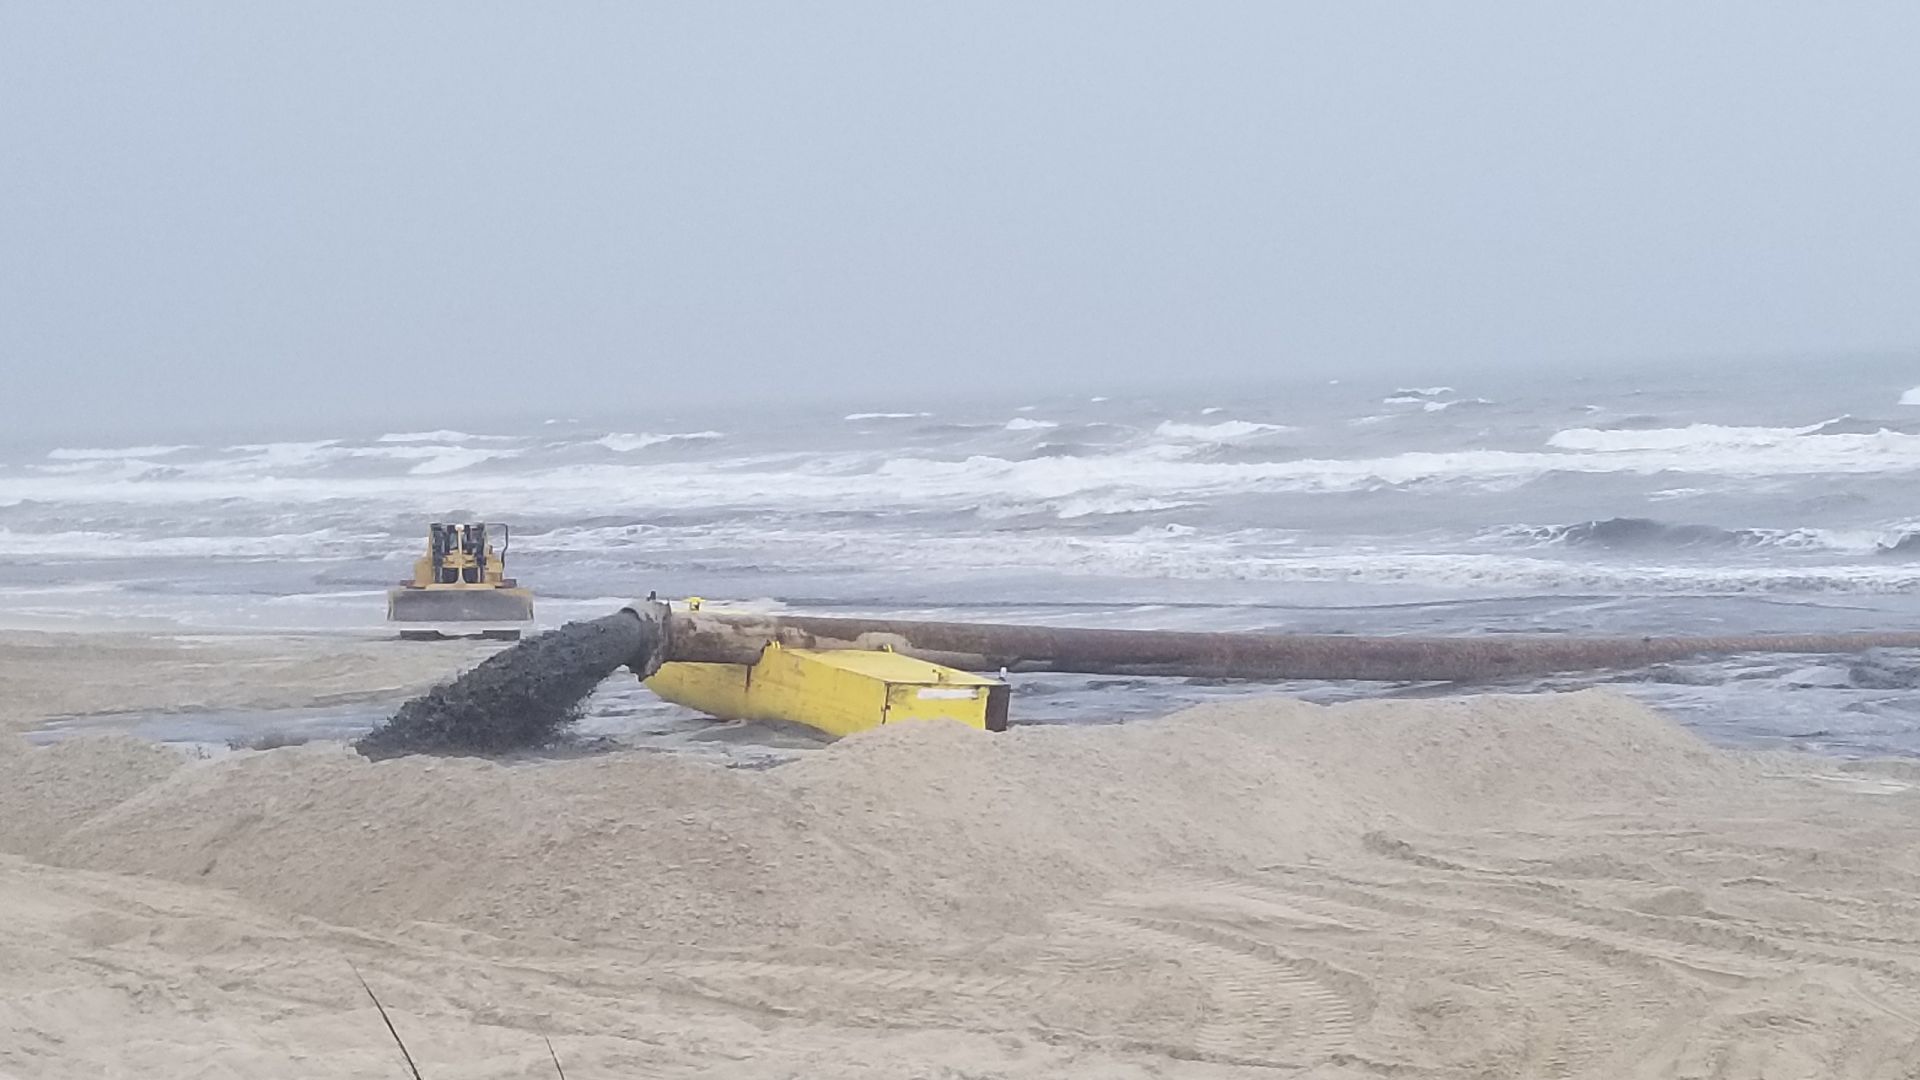 what is needed in south carolina to dredging sunken logs and sell them